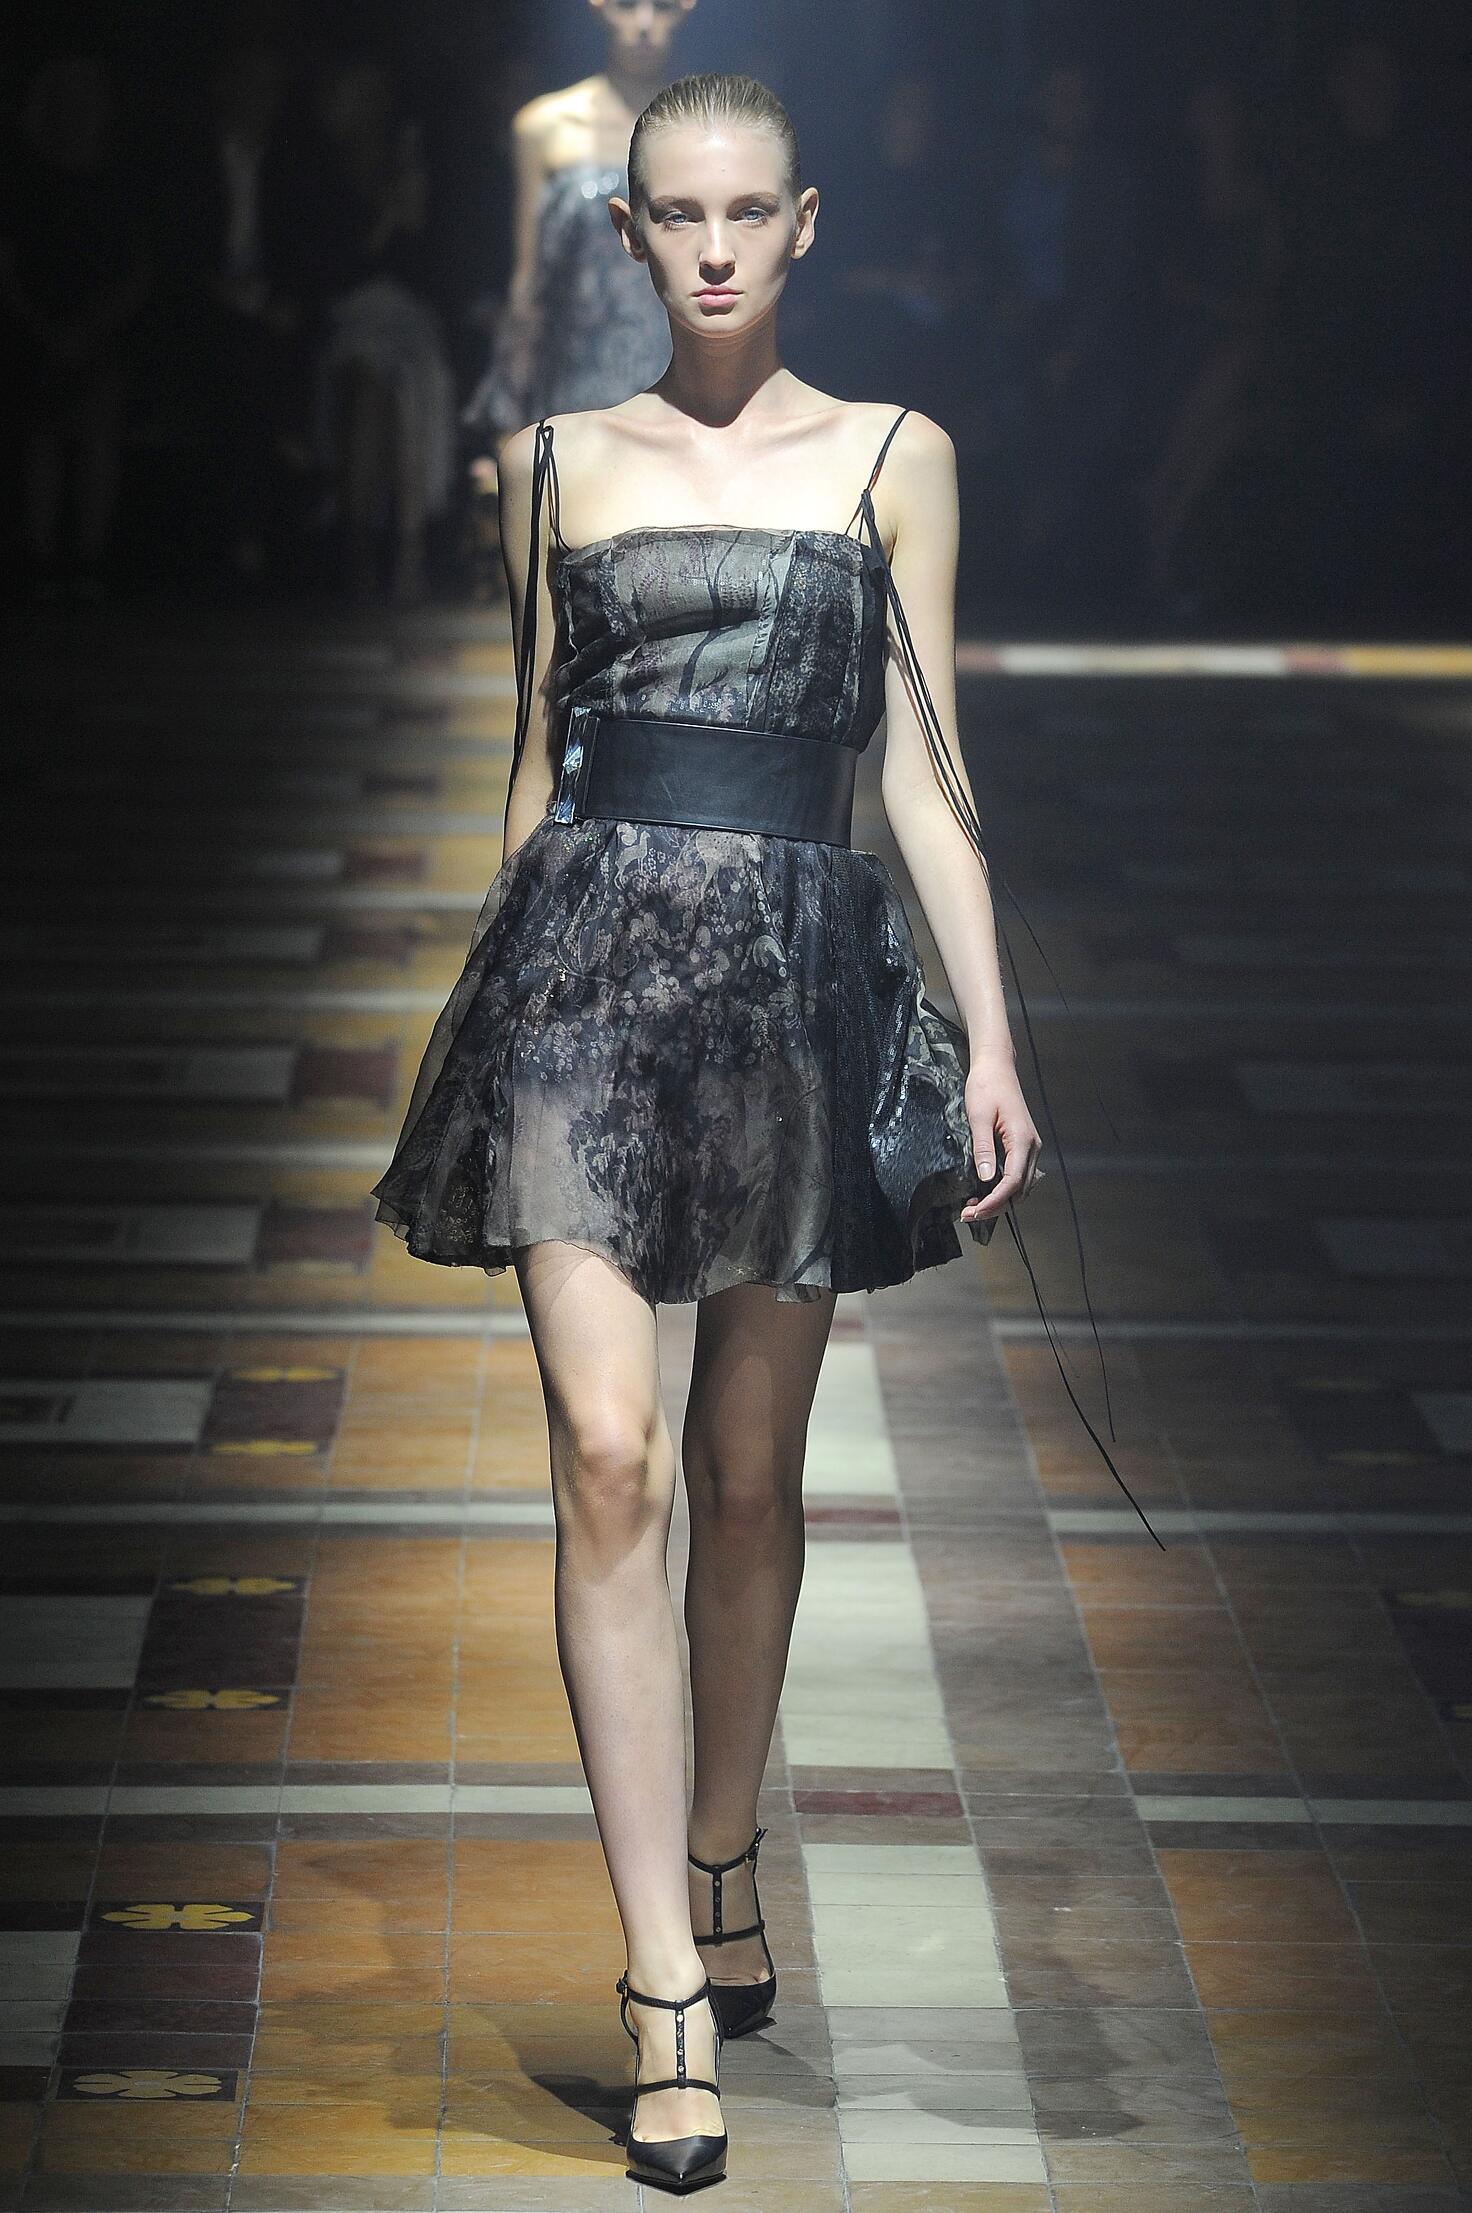 LANVIN SPRING SUMMER 2015 WOMEN'S COLLECTION | The Skinny Beep